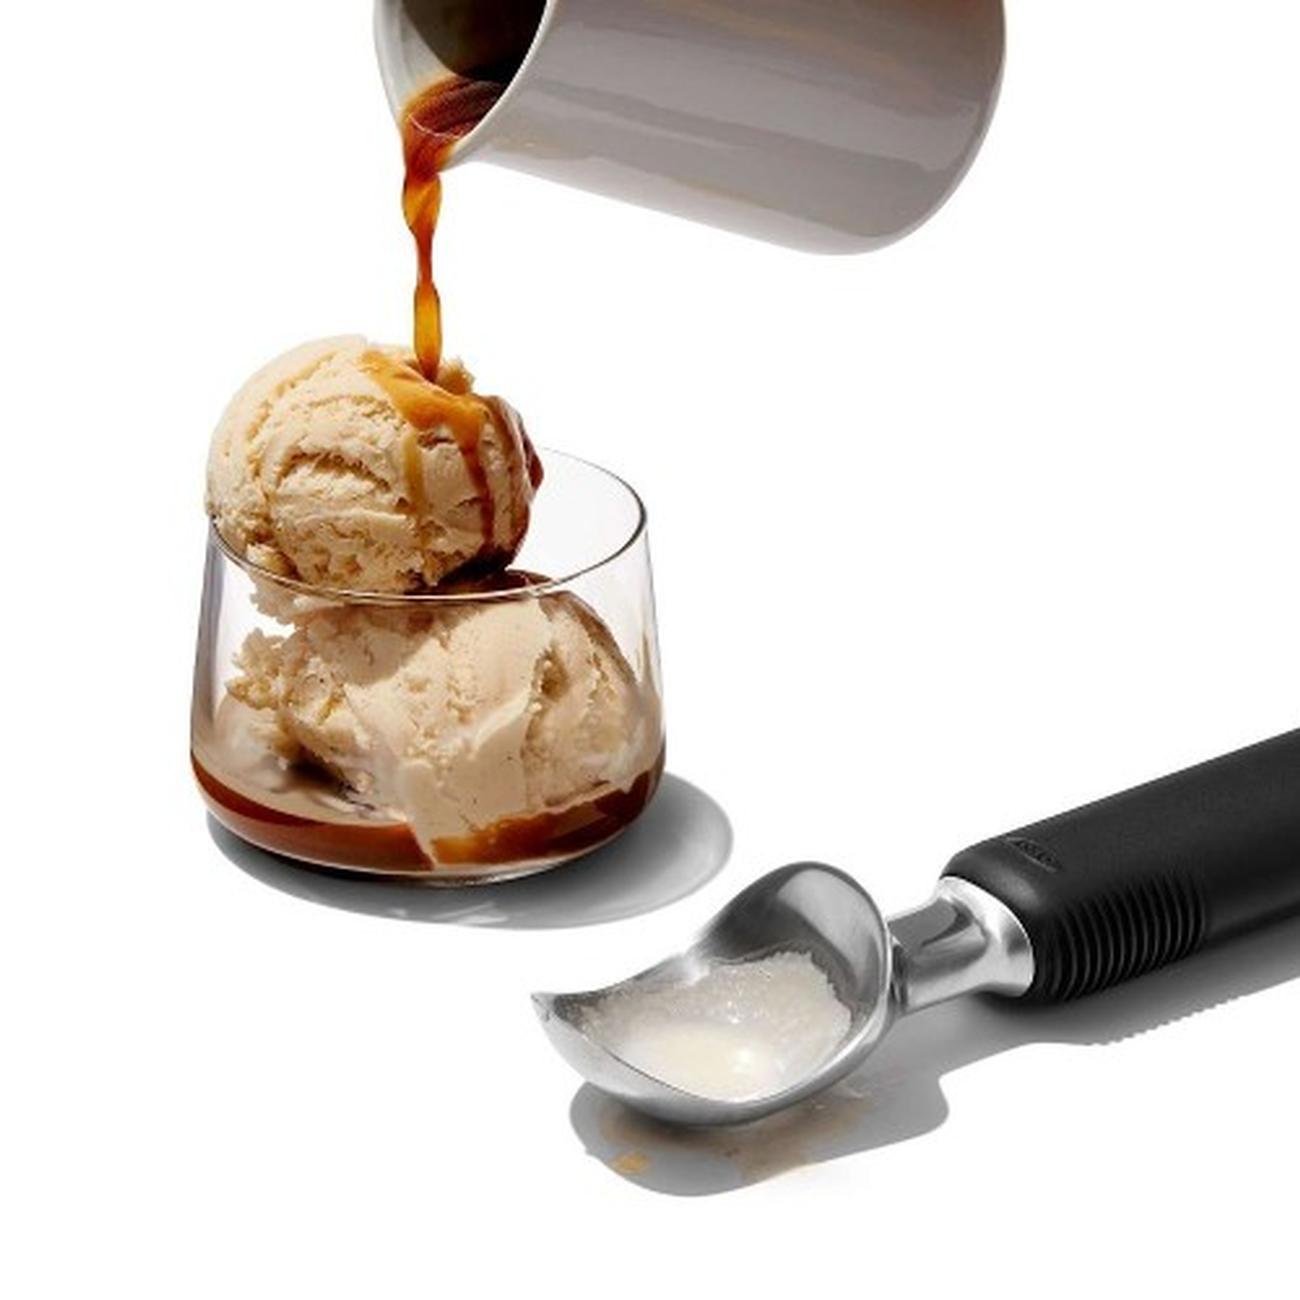 https://www.thekitchenwhisk.ie/contentfiles/productImages/Large/OXO-Stainless-Steel-Ice-Cream-Scoop-Good-Grips-moodshot-1.jpg